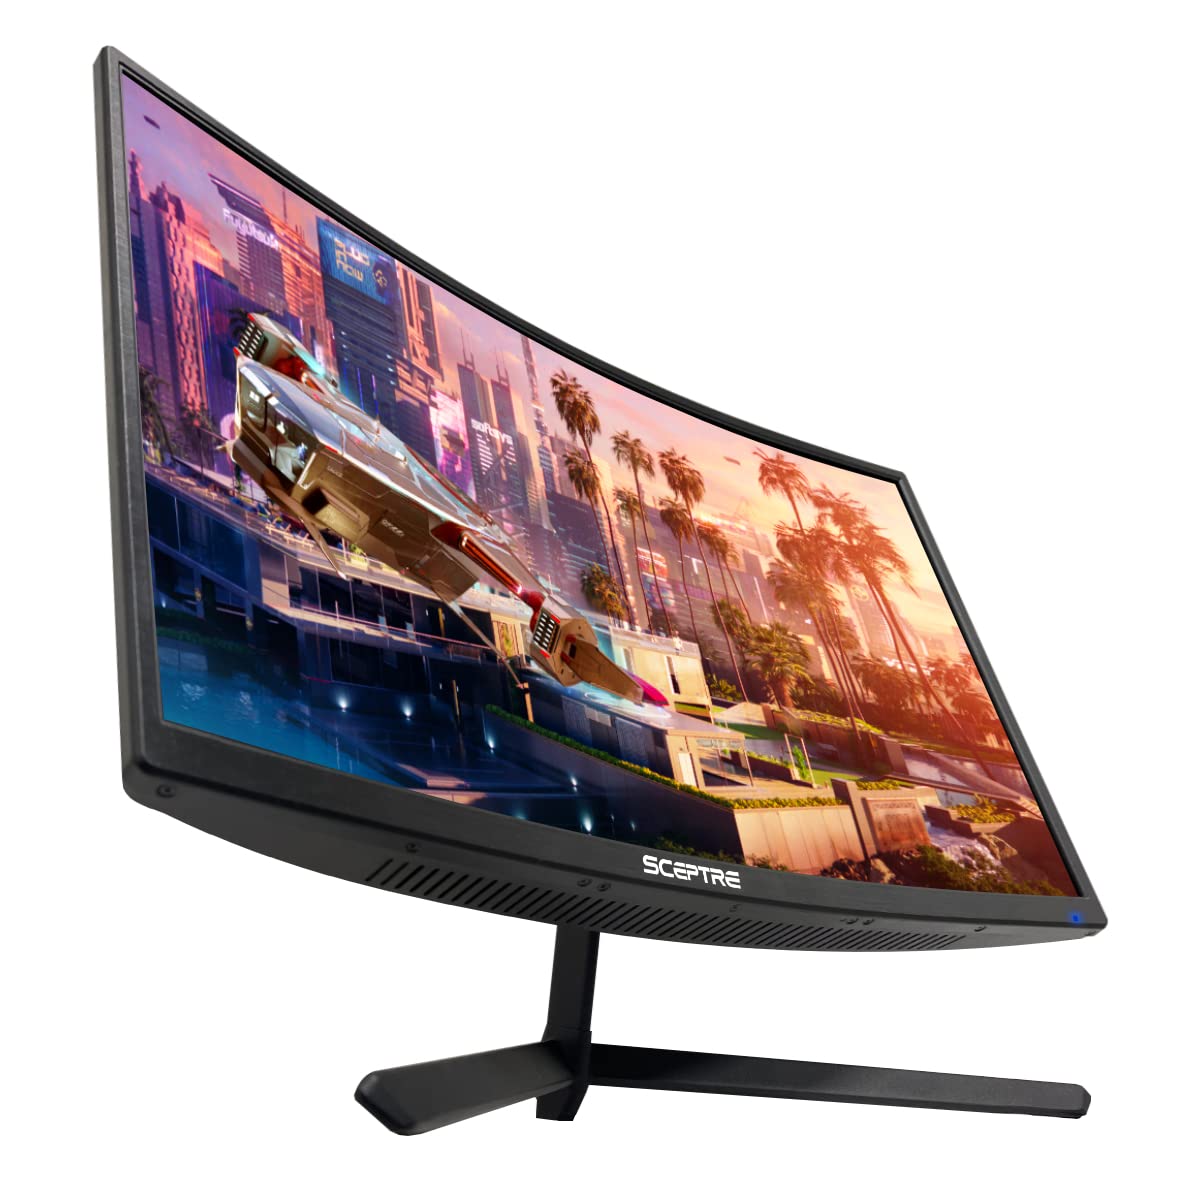 Sceptre 24-inch Curved Gaming Monitor 1080p up to 165Hz DisplayPort HDMI 99% sRGB, AMD FreeSync Build-in Speakers Machine Black (C248B-FWT168)